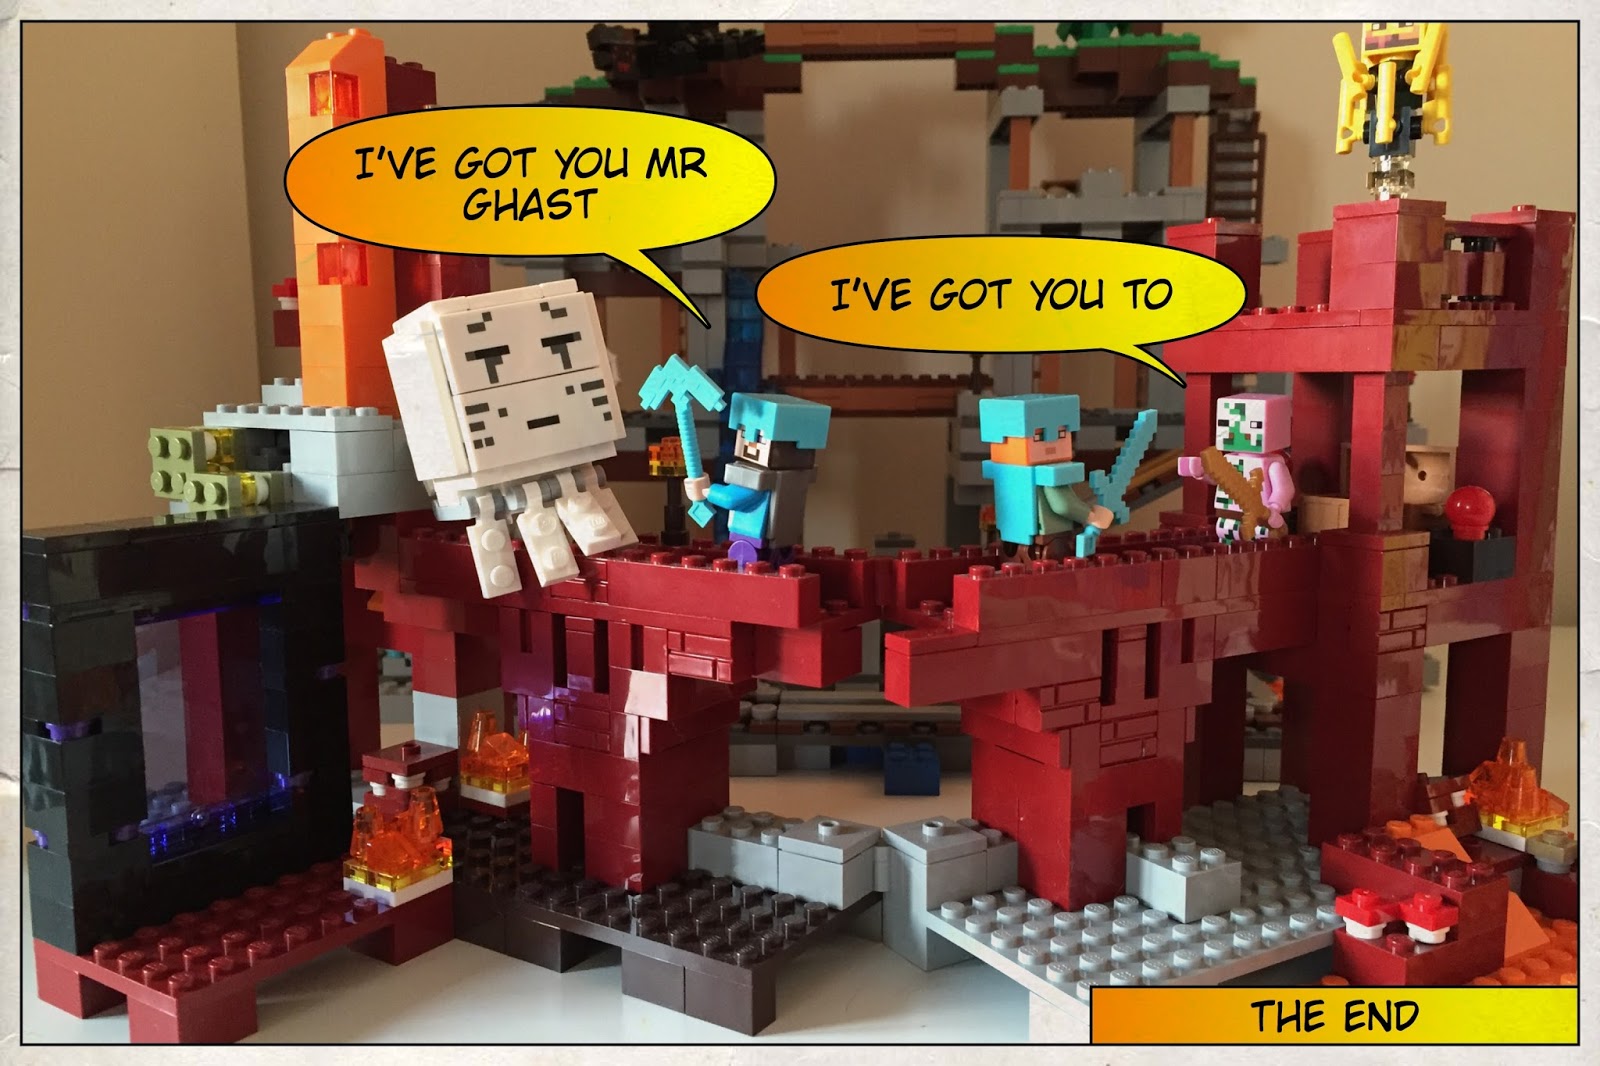 lego minecraft the nether fortress